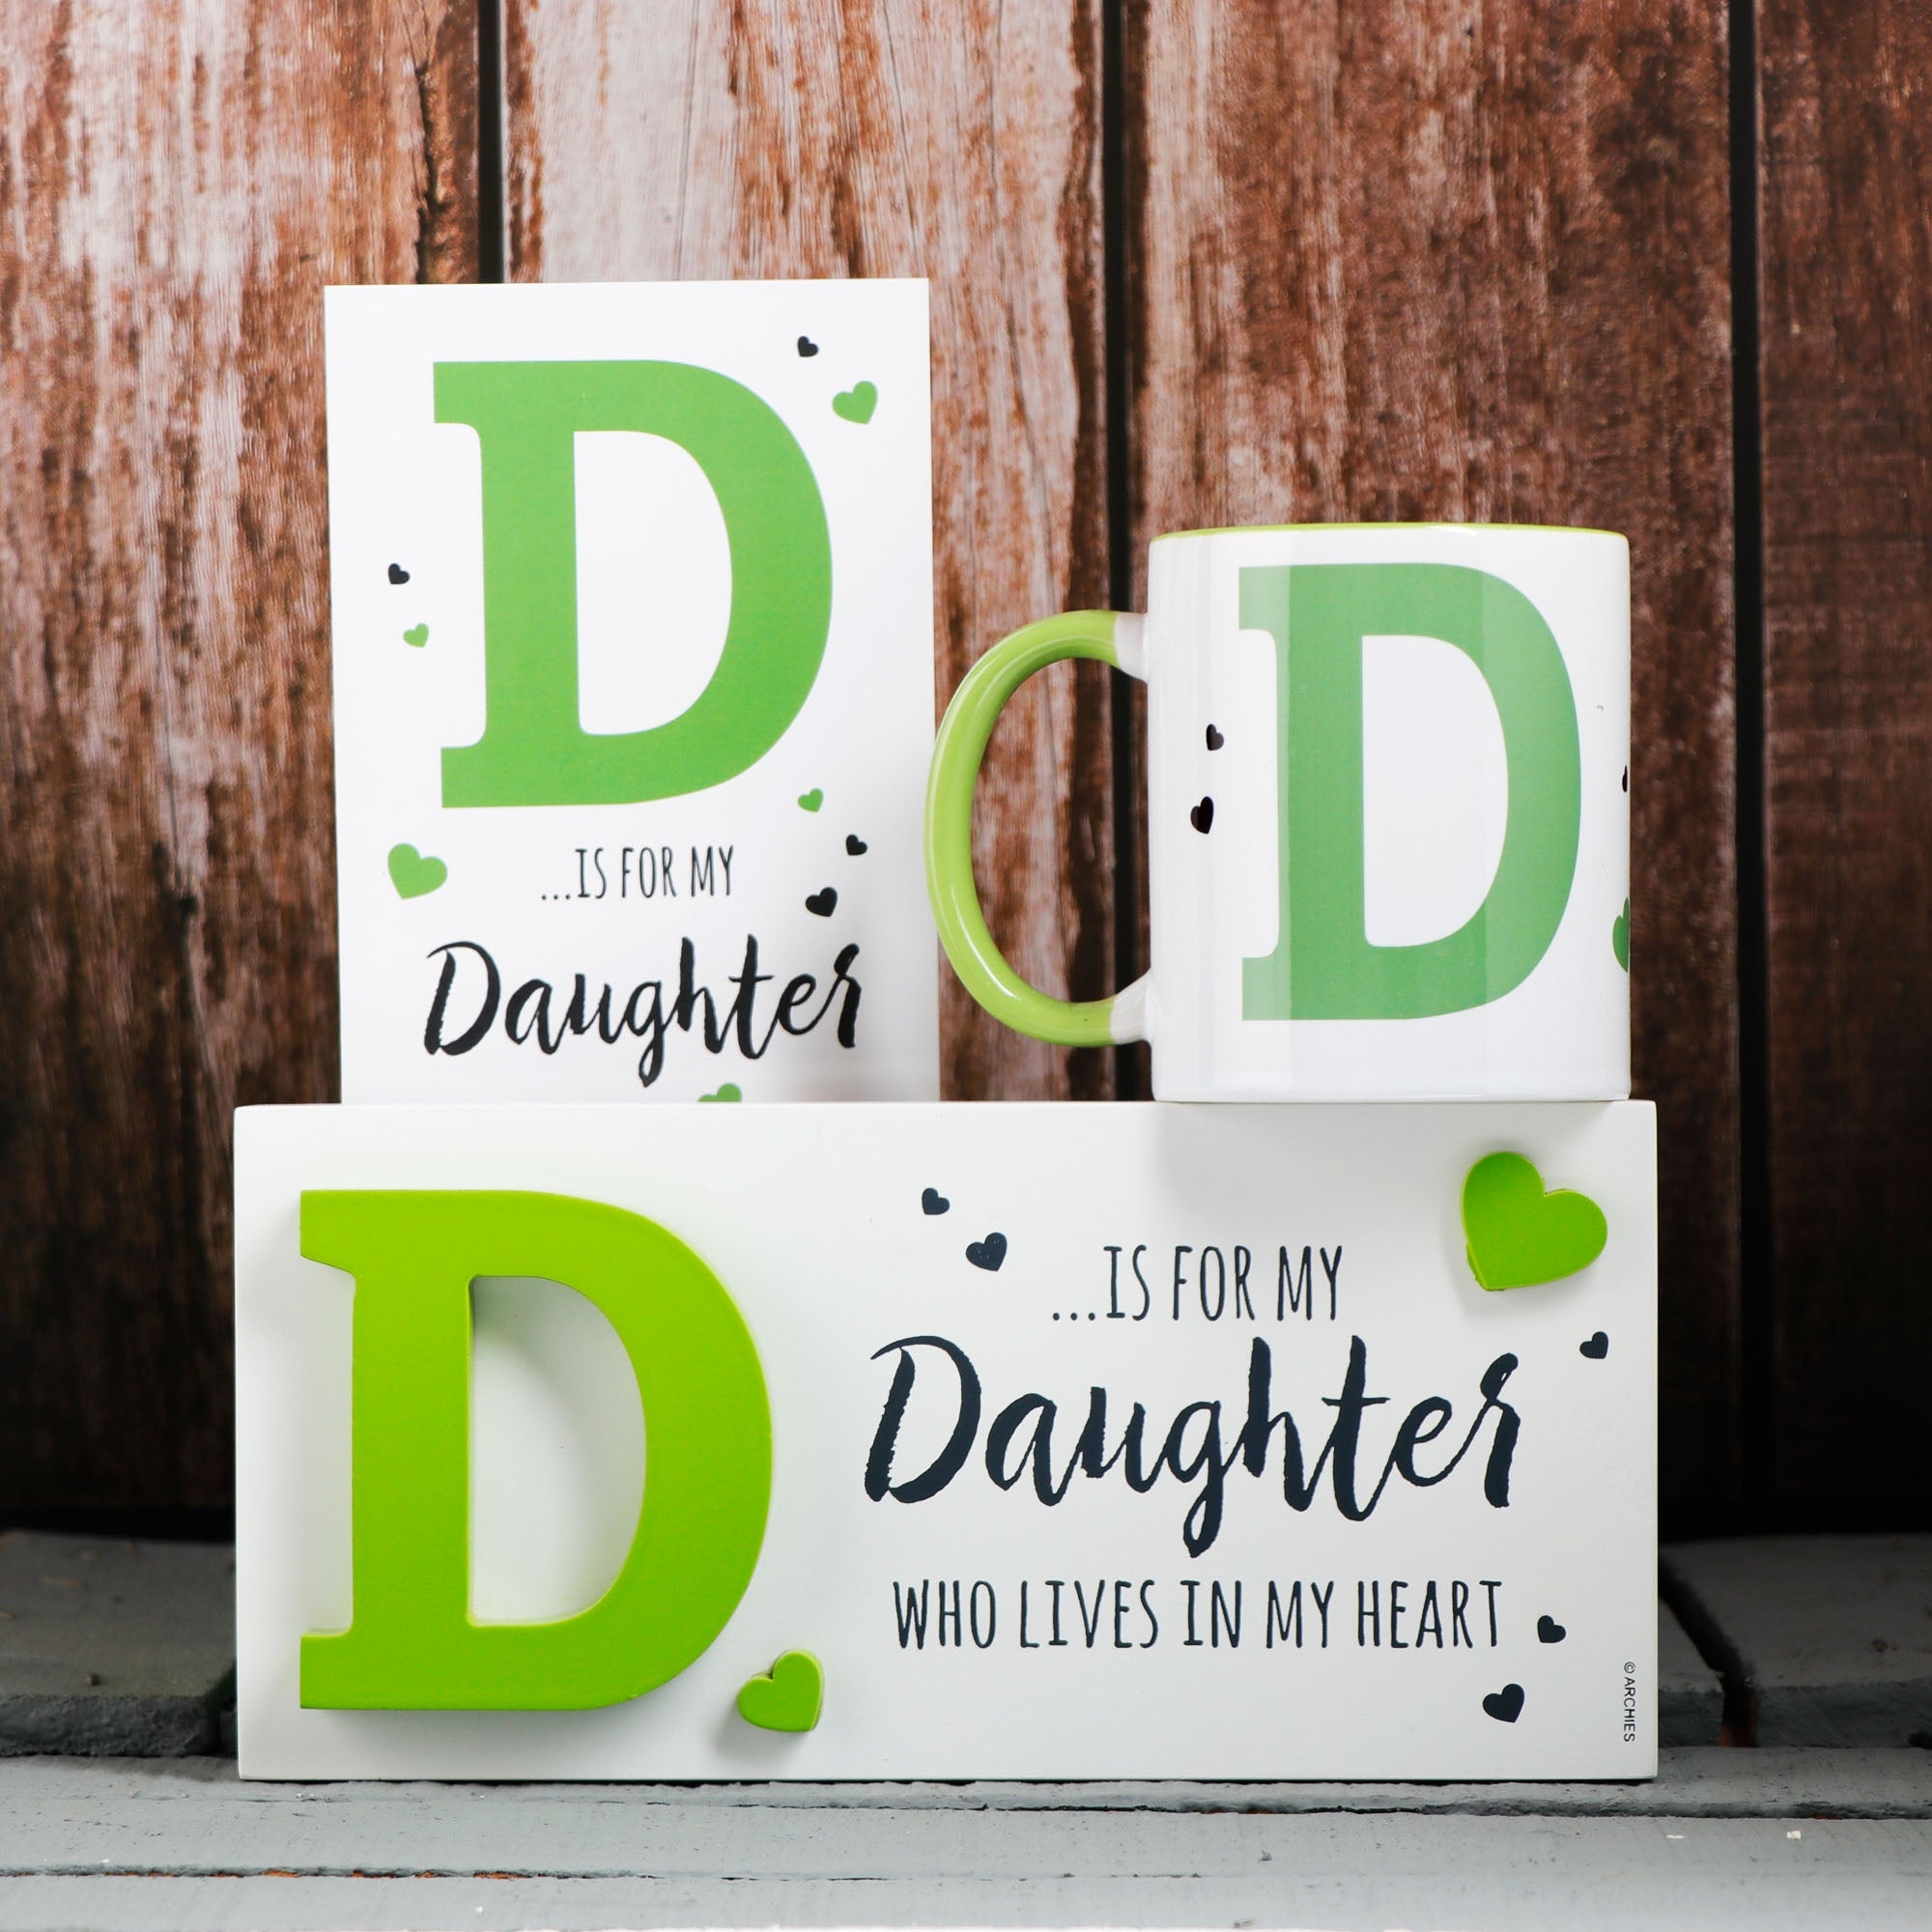 Archies | Archies KEEP SAKE Daughter Gift Combo with Ceramic Mug and Elevated Initial Quotation - with a FREE GREETING CARD 0